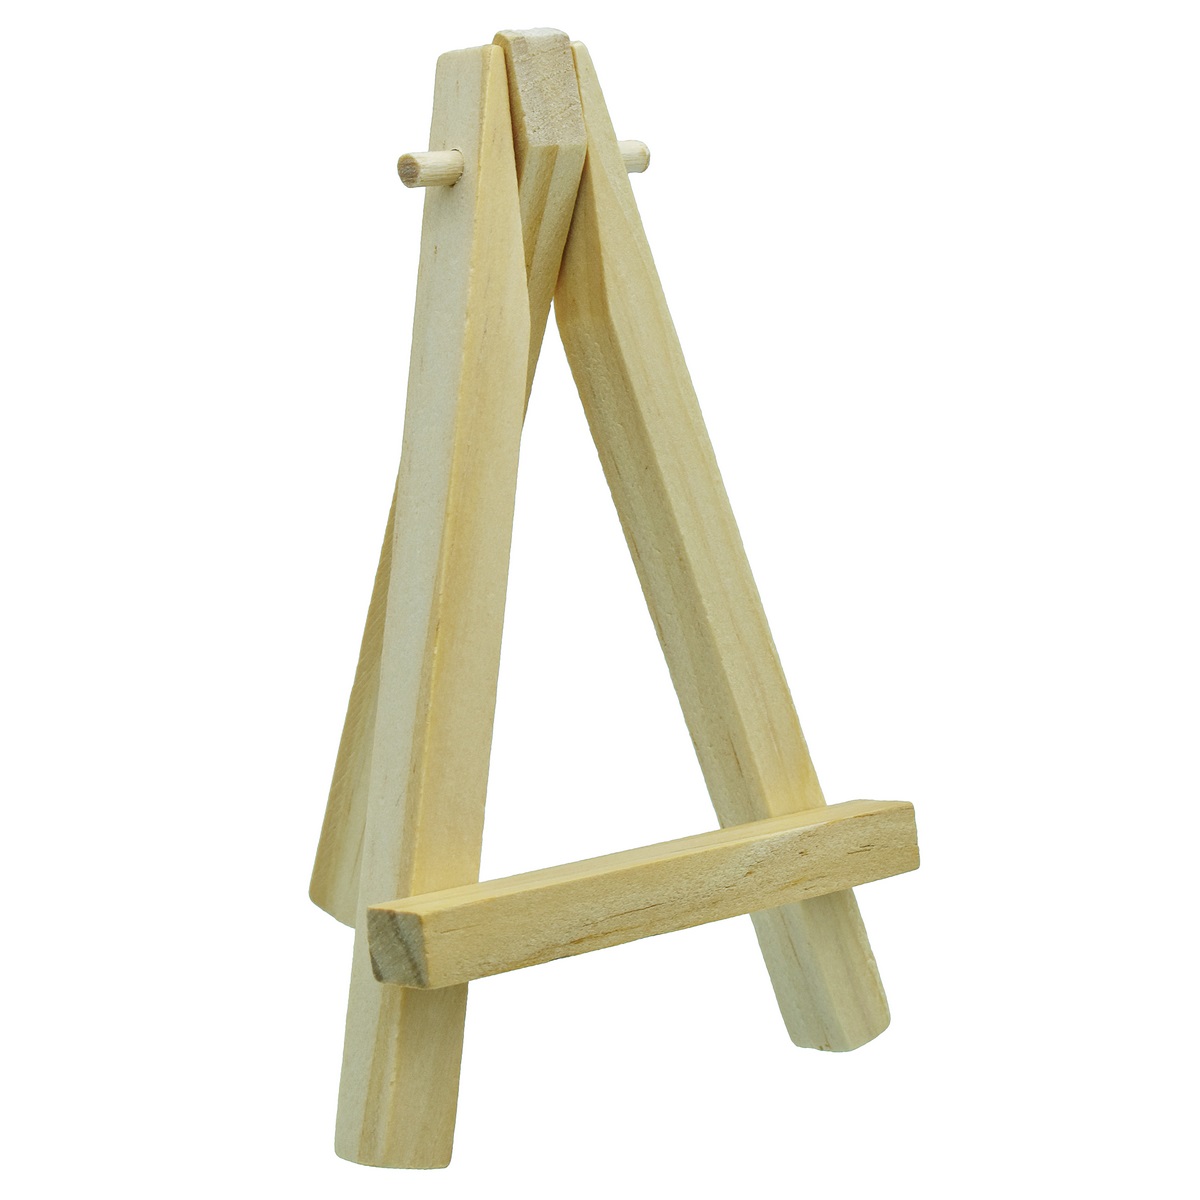 Wooden Easel / Canvas Stand - 12 Inches at Rs 350.00